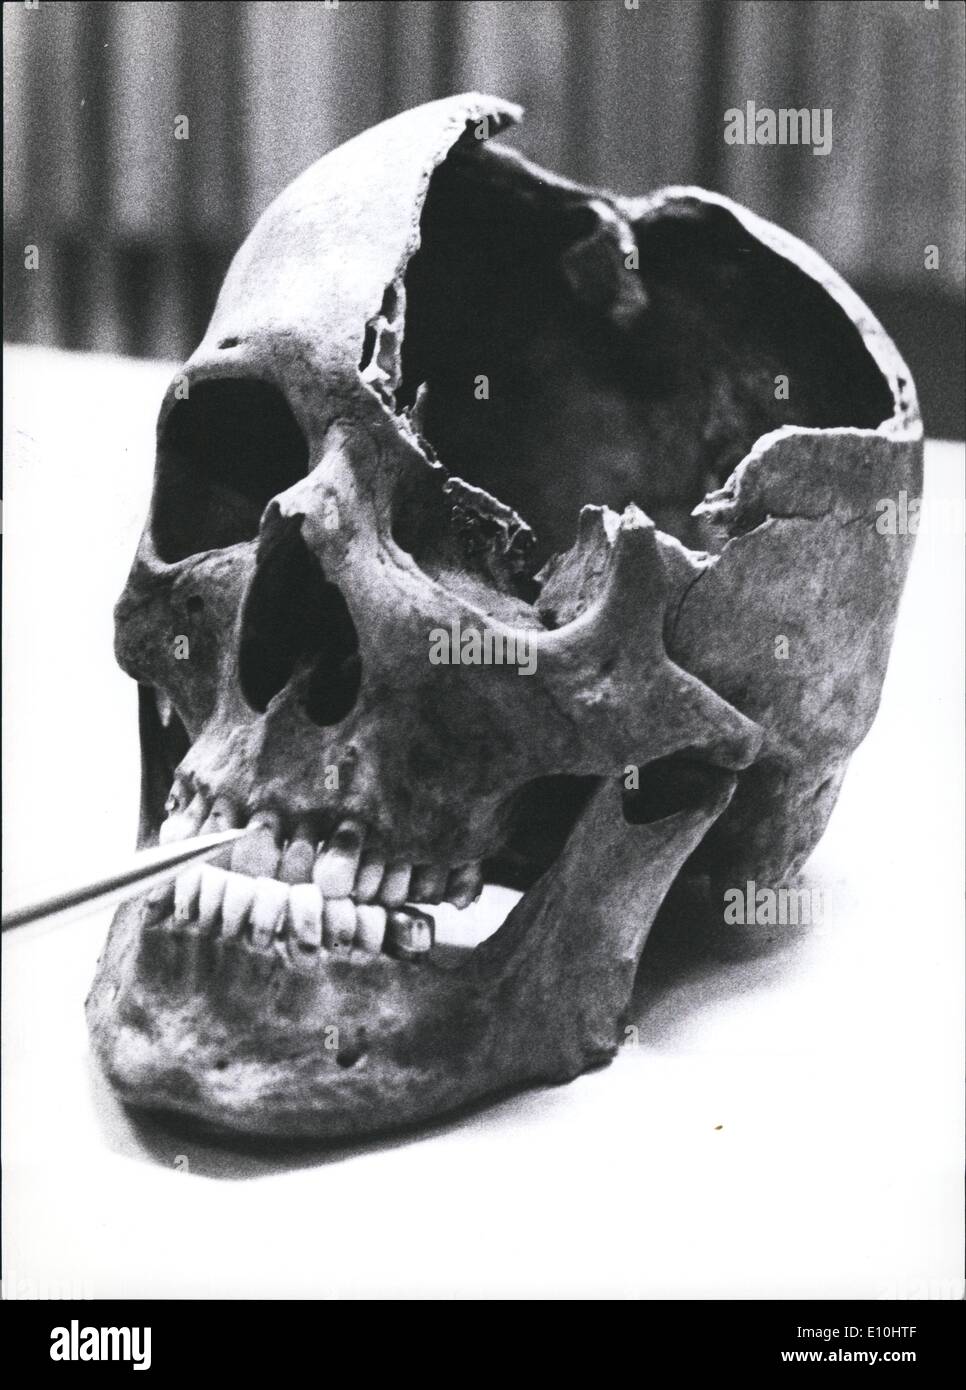 Dec. 12, 1972 - New trace in the case of ''Reichseiter'' Martin Bormann ? : Two bones, a skull and upper thigh were found in excavations in Berlin, Lehrt Station. At this place Martin Bormann, the ''substitute'' of Adolf Hitler is said to be killed on his flight 1945. The Francfort public prosecutor's office sent the dental mould of the Nazi leader to Berlin. Photo shows The skull with well-conserved teeth. Stock Photo